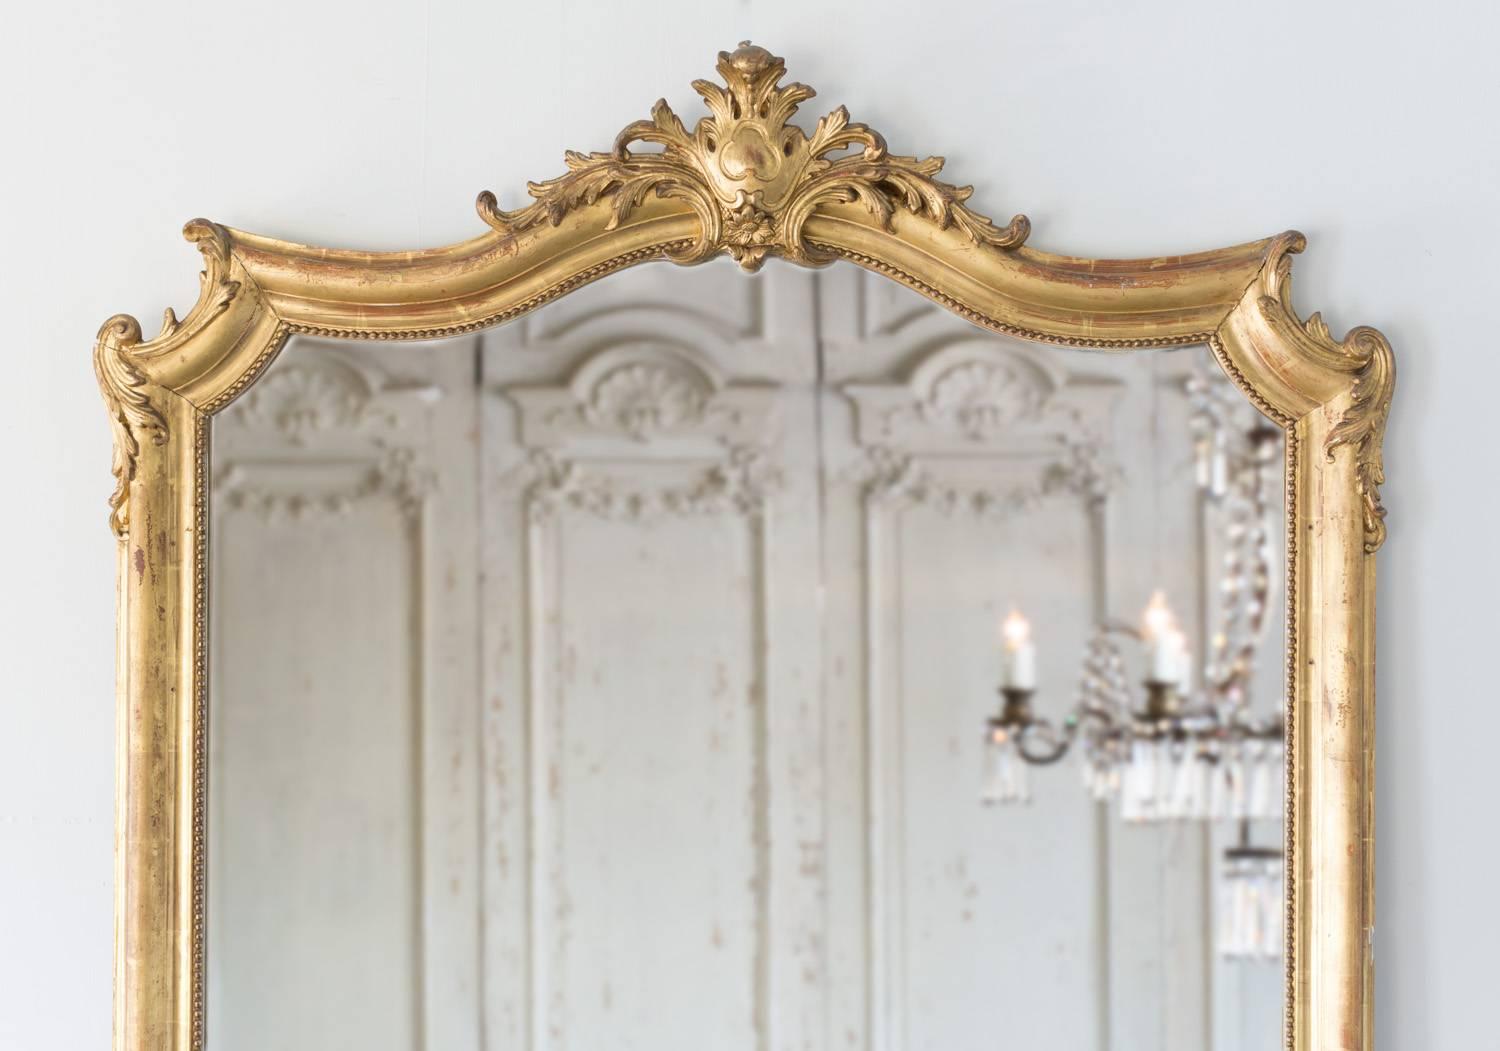 Delightful gilt mirror with delicate beading along the inside of the simple frame. The curvature of the shoulder and crest on this mirror contrasts beautifully against the otherwise linear frame. Sweet ocean waves spill over the shoulders with leafs